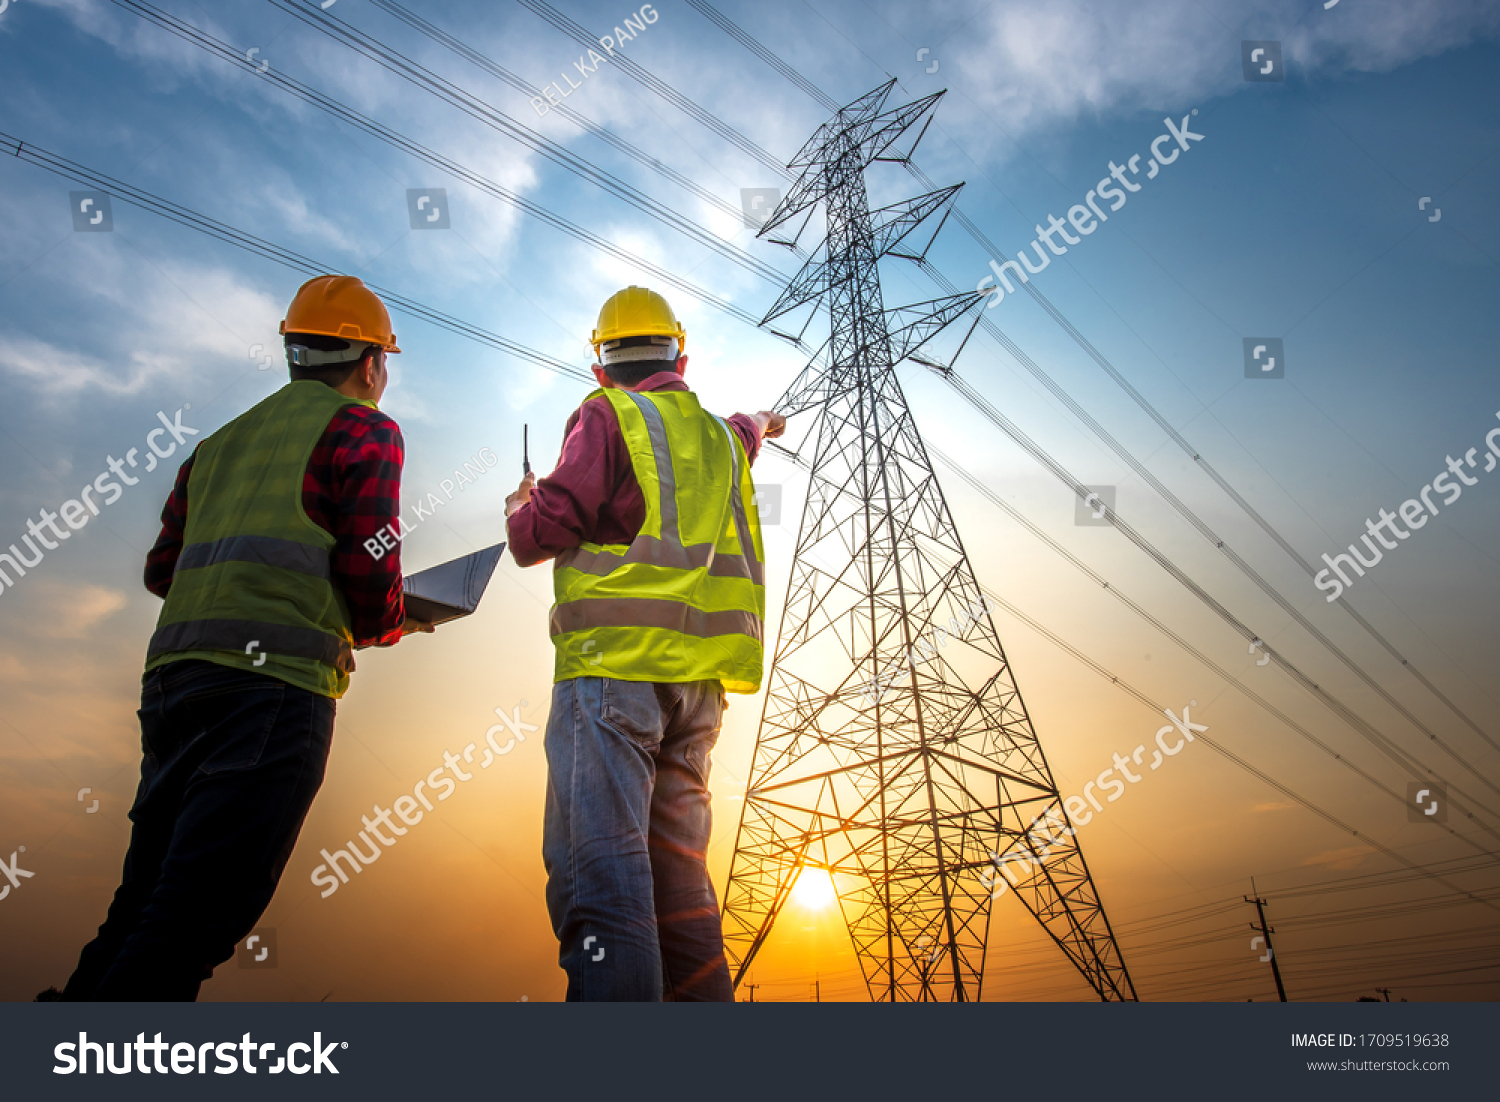 Picture of two electrical engineers using a notebook computer standing at a power station to view the planning work by producing electrical energy at high voltage electrodes. #1709519638